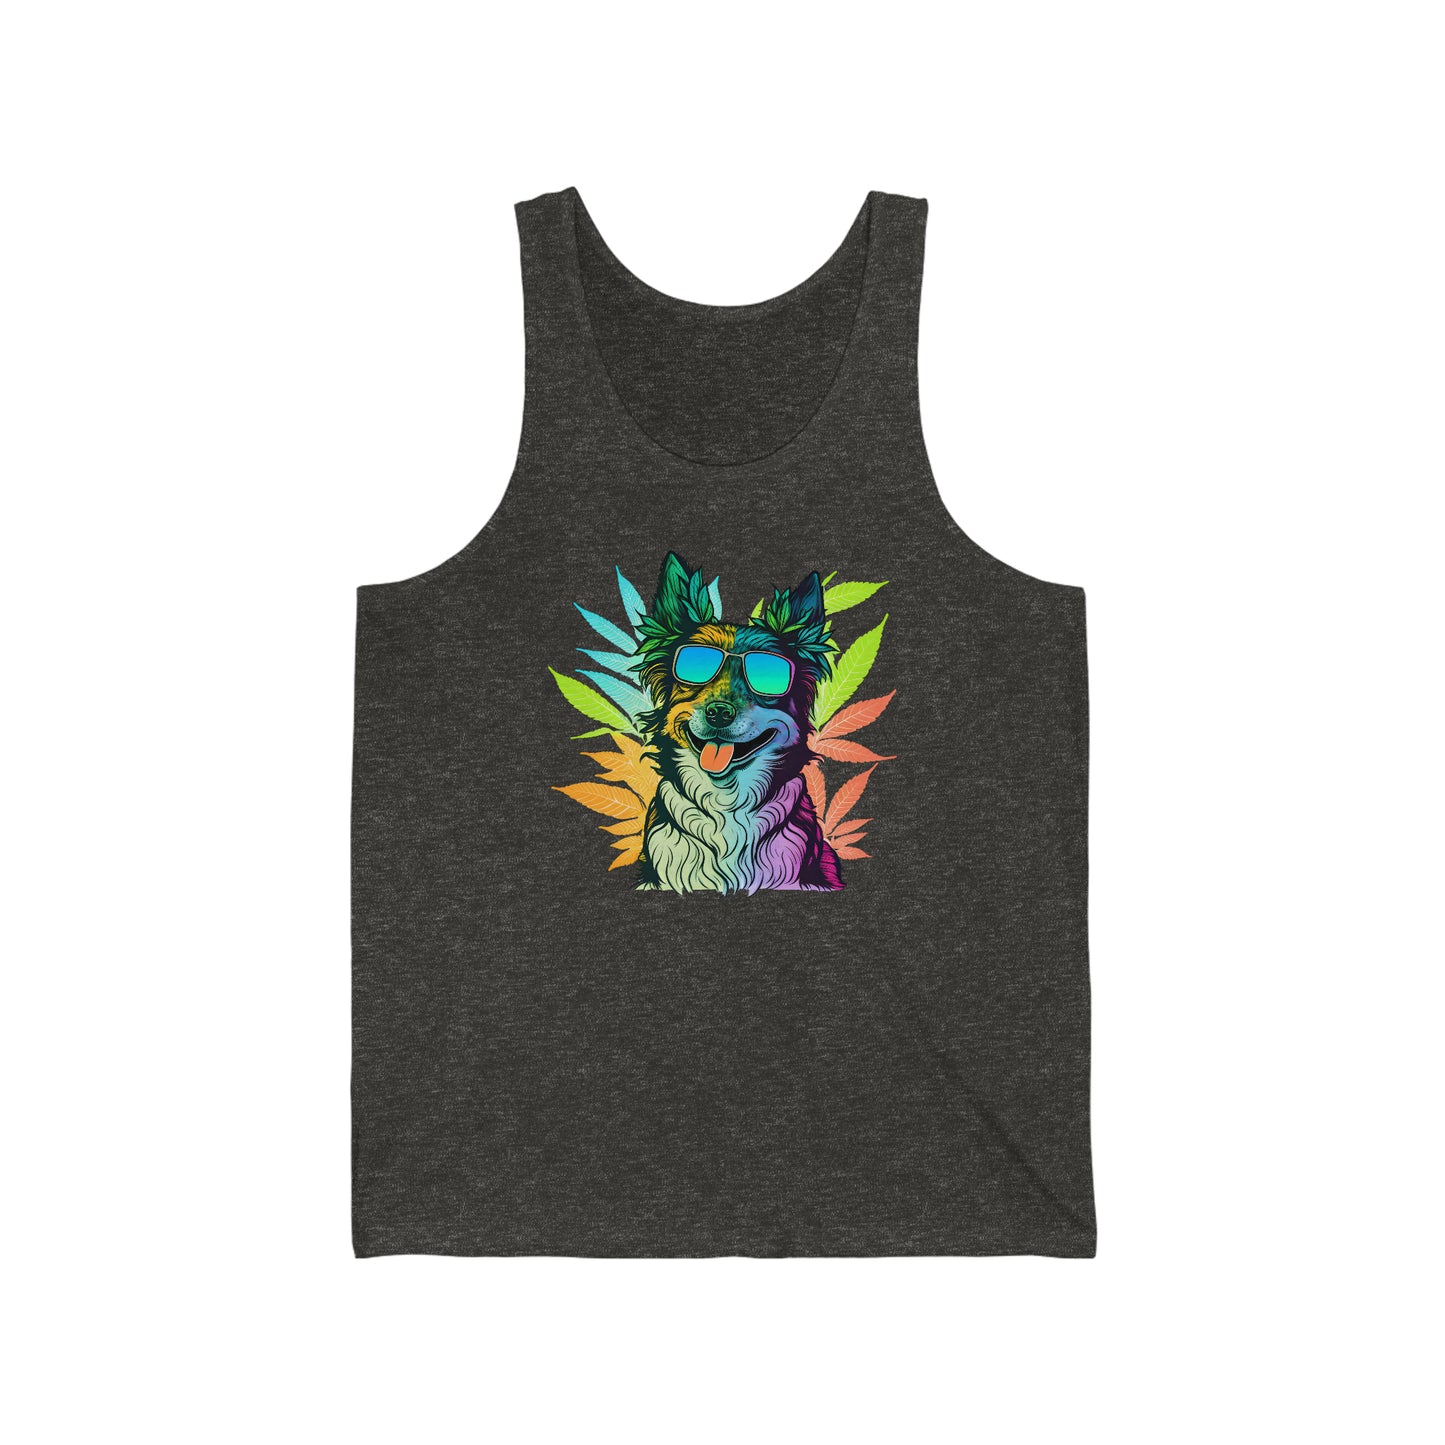 A Charcoal Black cannabis jersey weed tank top with a border collie wearing shades and surrounded by cannabis leaves